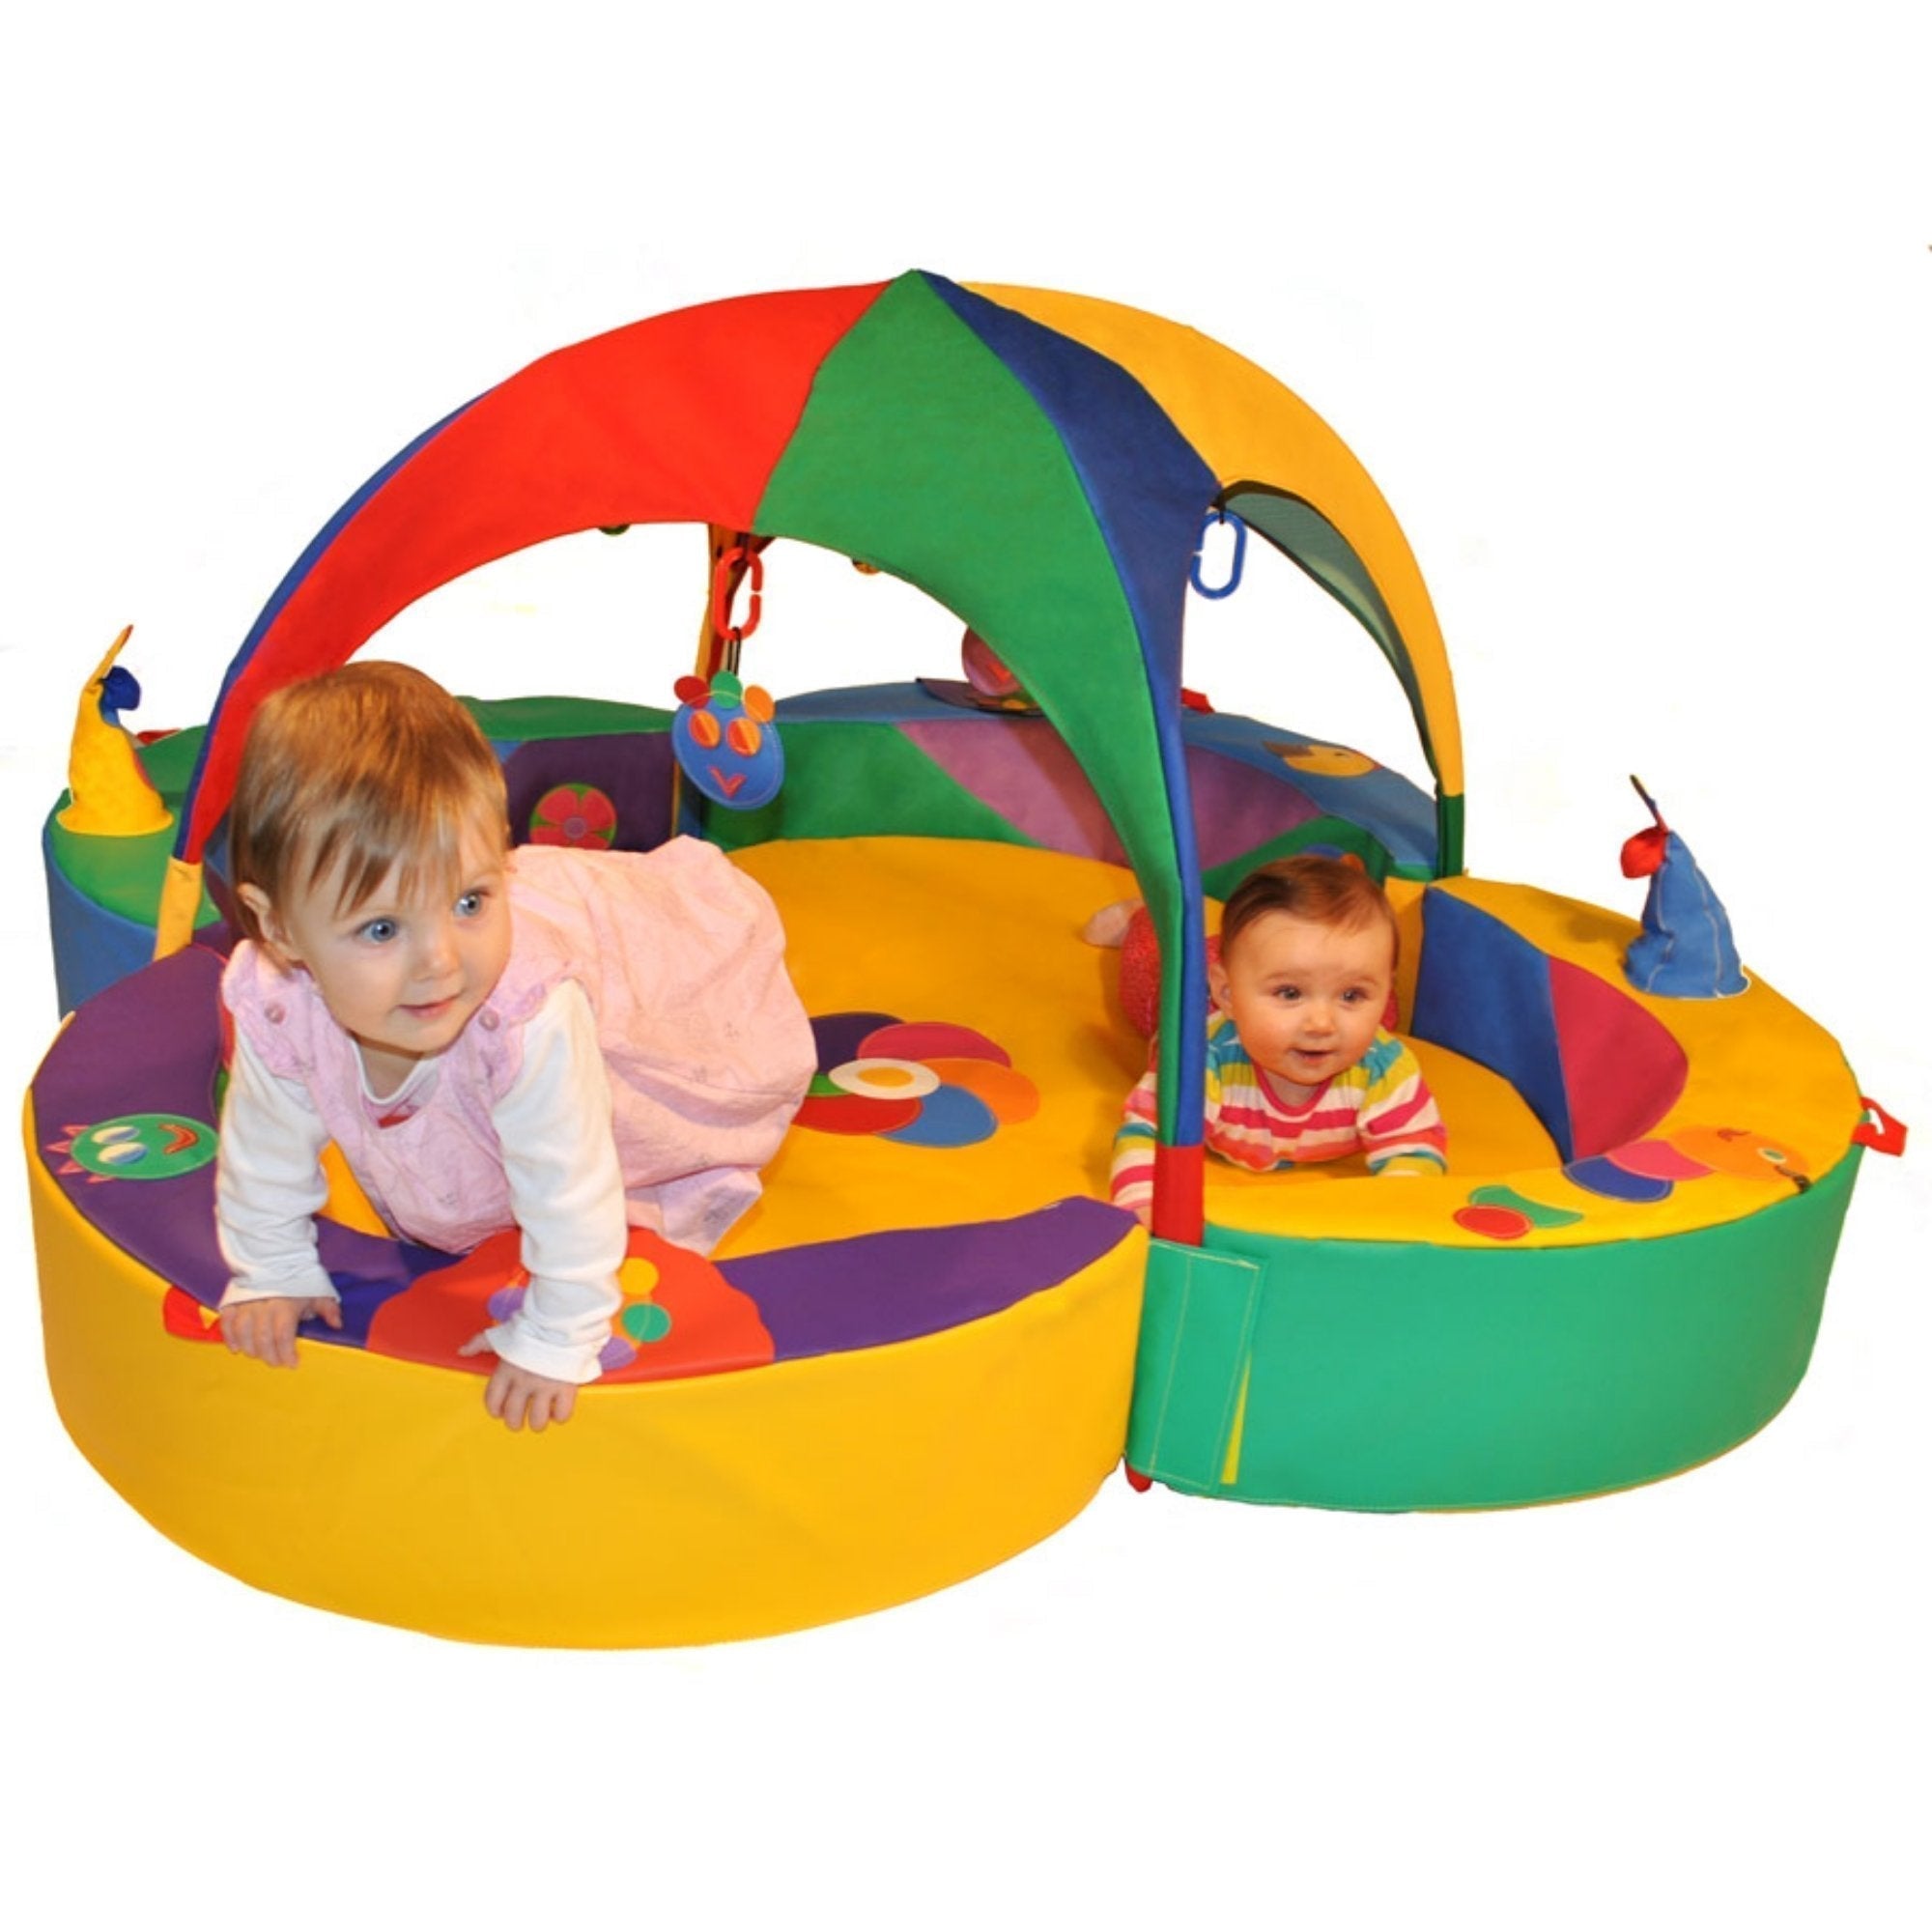 Crescent Ring Super Set, The Crescent Ring Super Set is top of the range and designed to create a real impact with nursery staff, babies and their mothers. The Black and White colours are designed to aid early development of sight. It looks spectacular and has space for up to 5 babies. It is superbly designed to help with early development. It surrounds a young baby with tactile, visual and sound stimulation, encouraging them to take notice and explore their surroundings. The soft foam walls offer interest 